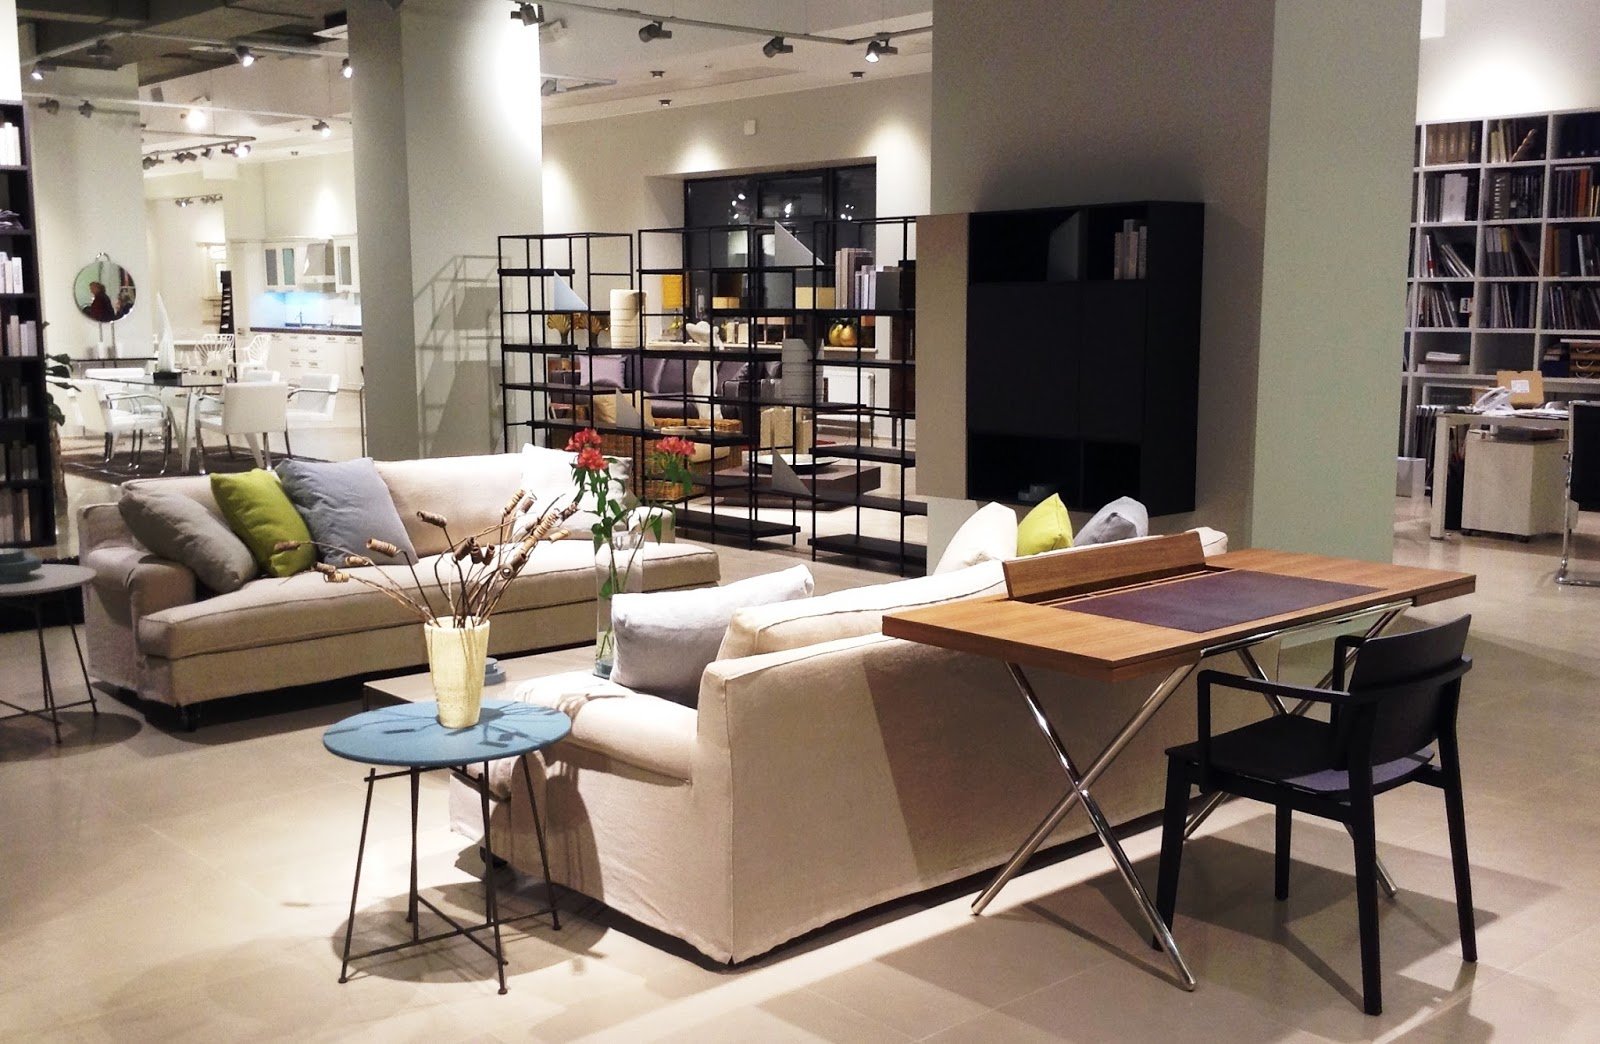 Perfect Furniture Shop: One-Stop Destination For All Home Décor Dreams